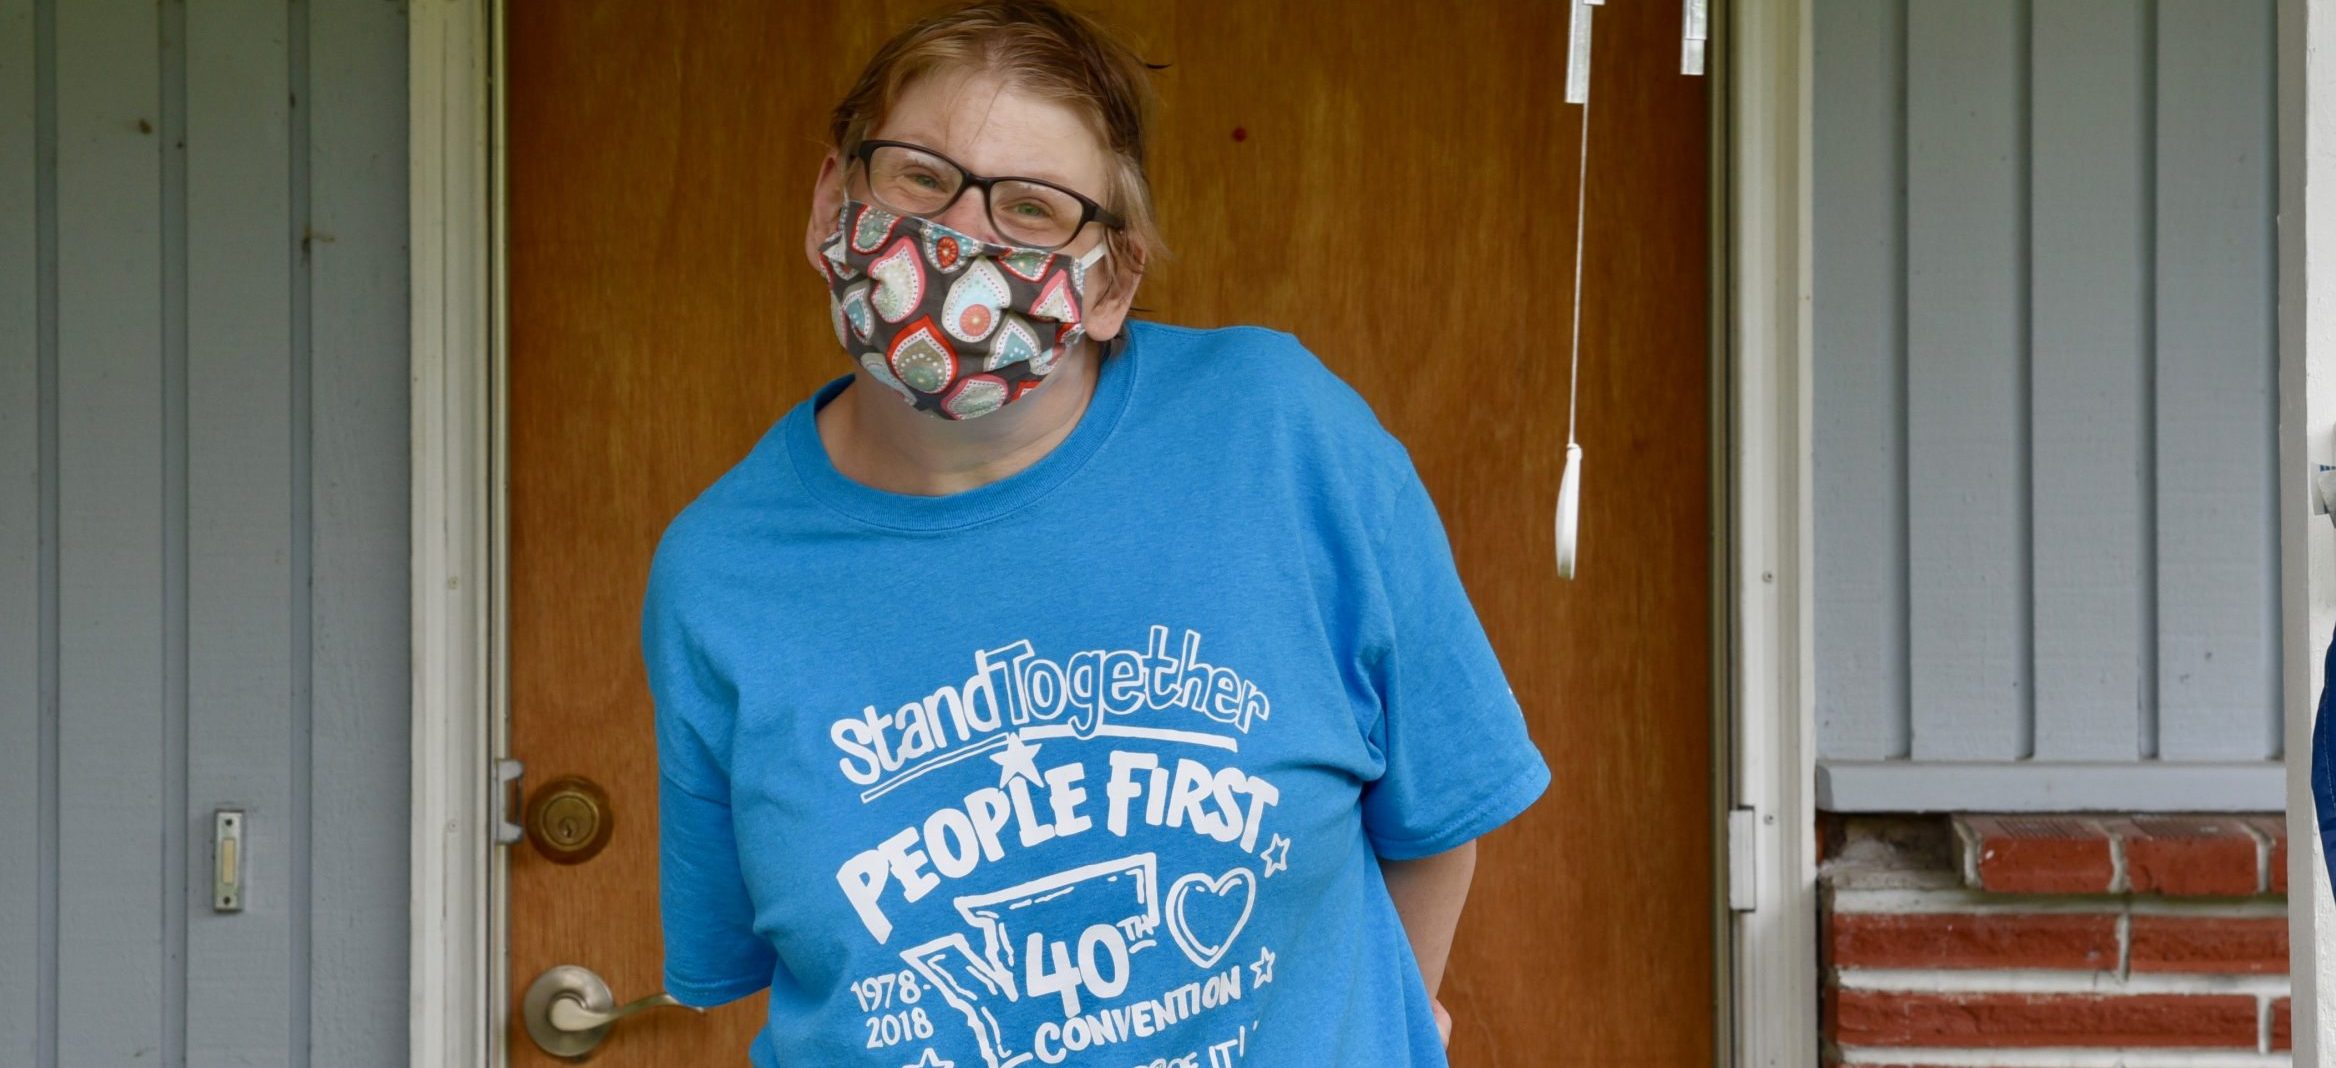 Disabled woman with People First t-shirt wearing a mask, standing outside on a porch.